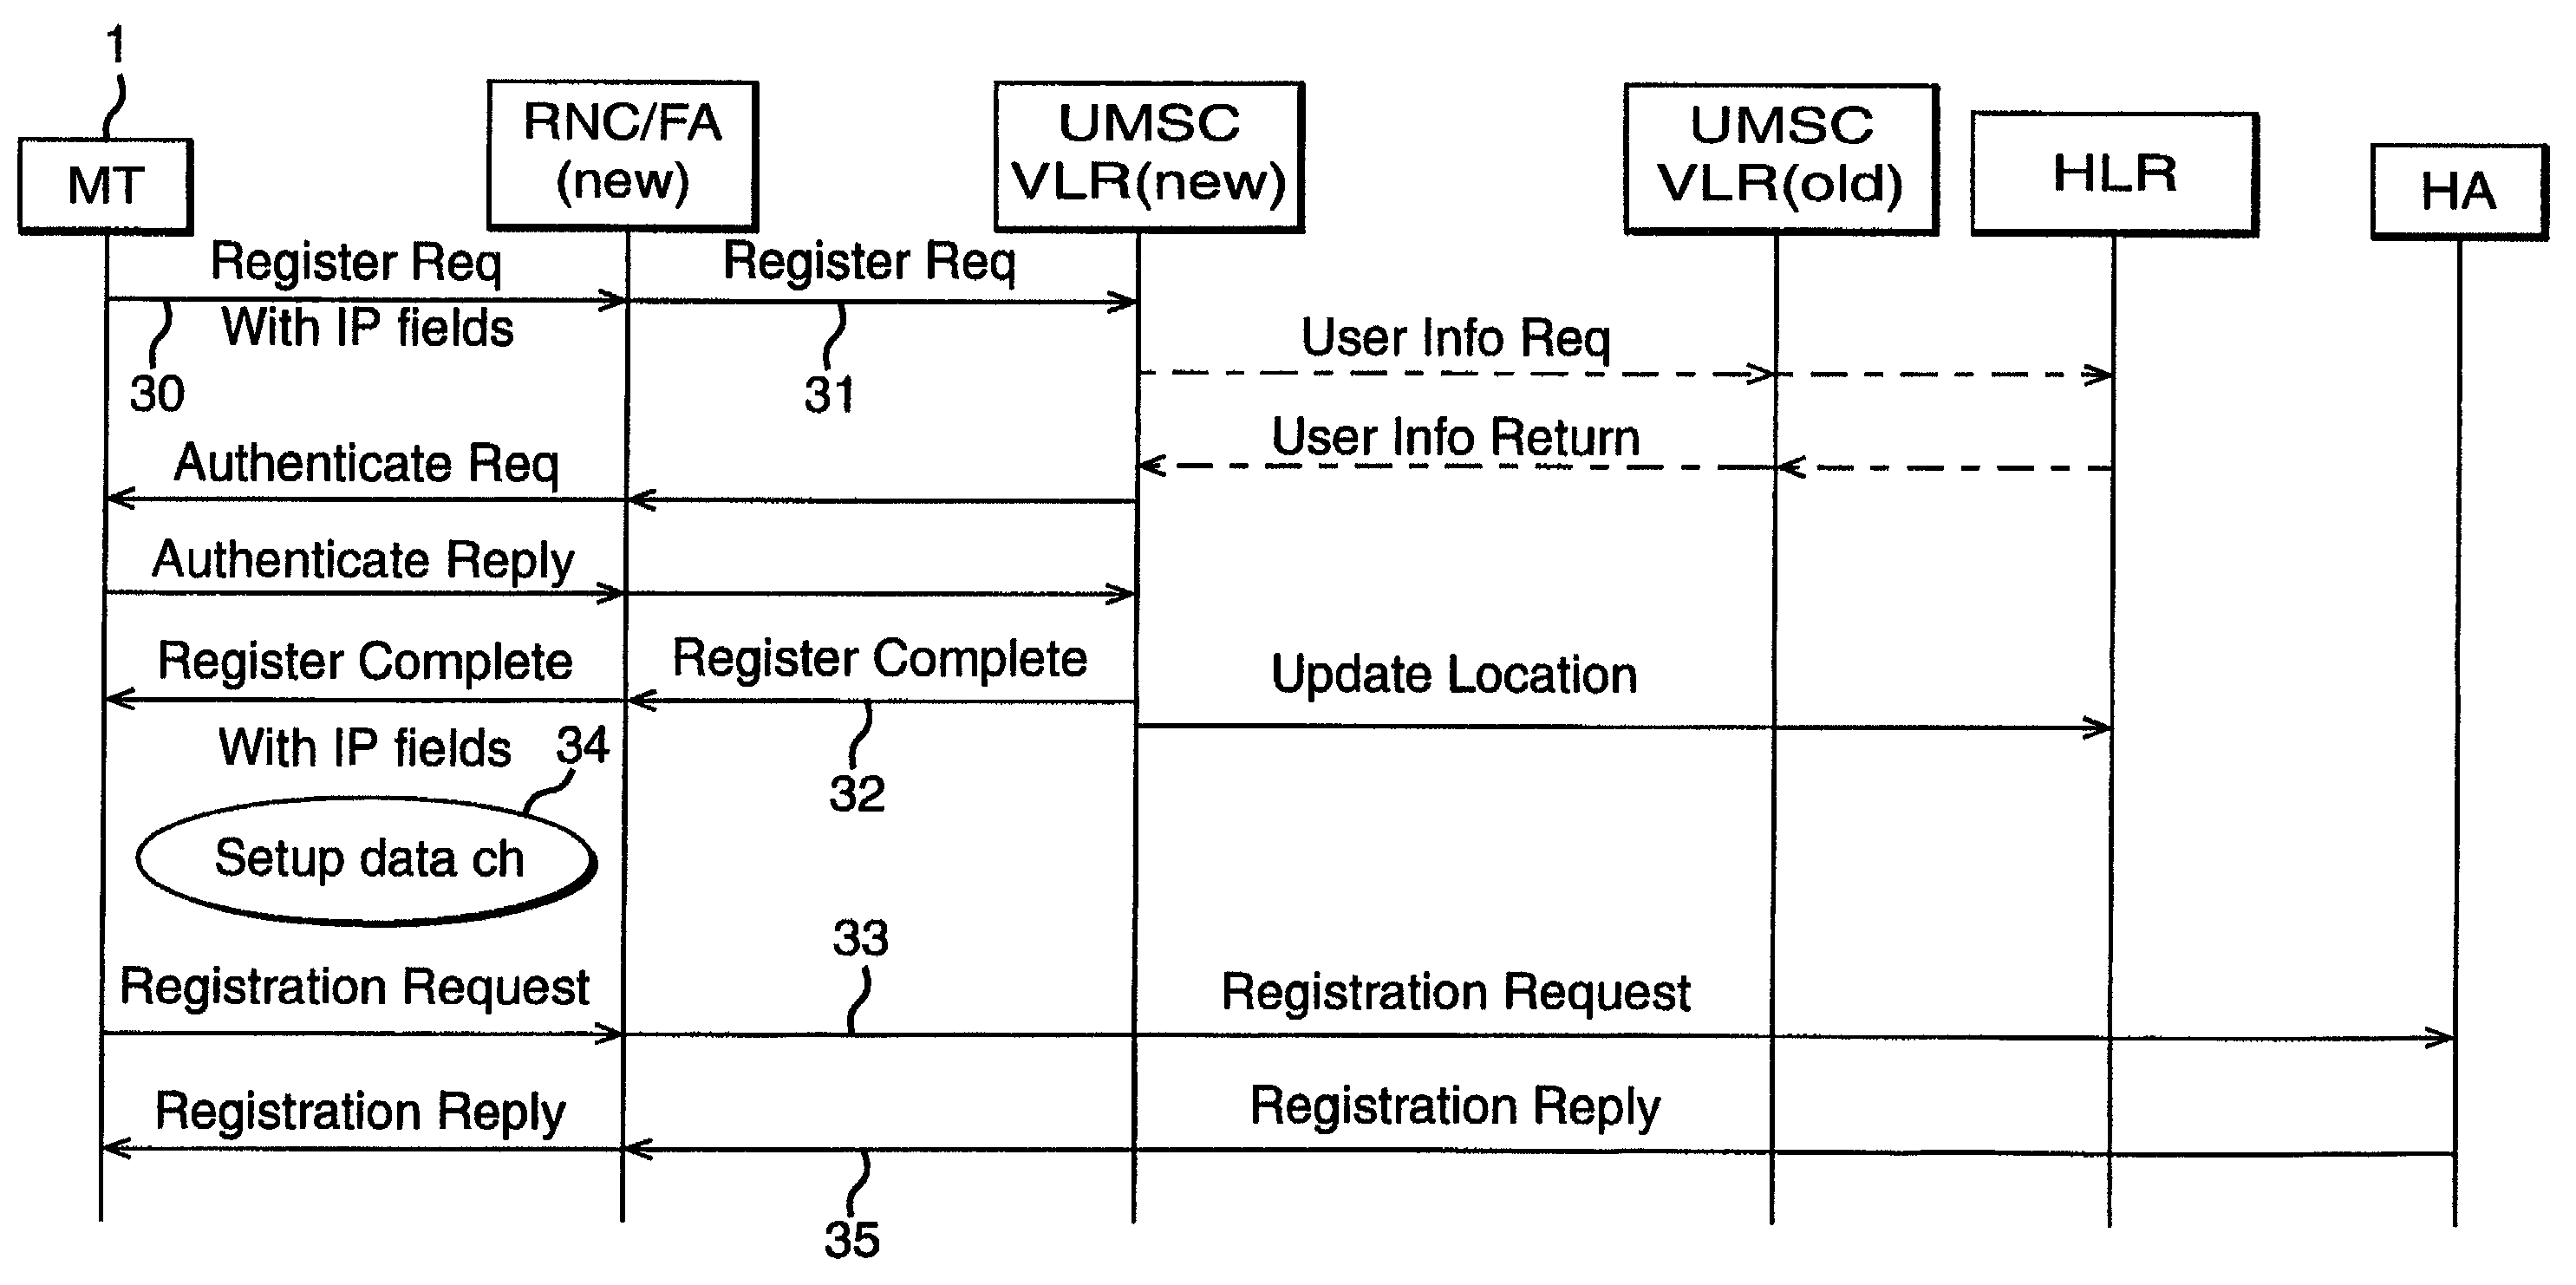 User registration and location management for mobile telecommunications systems